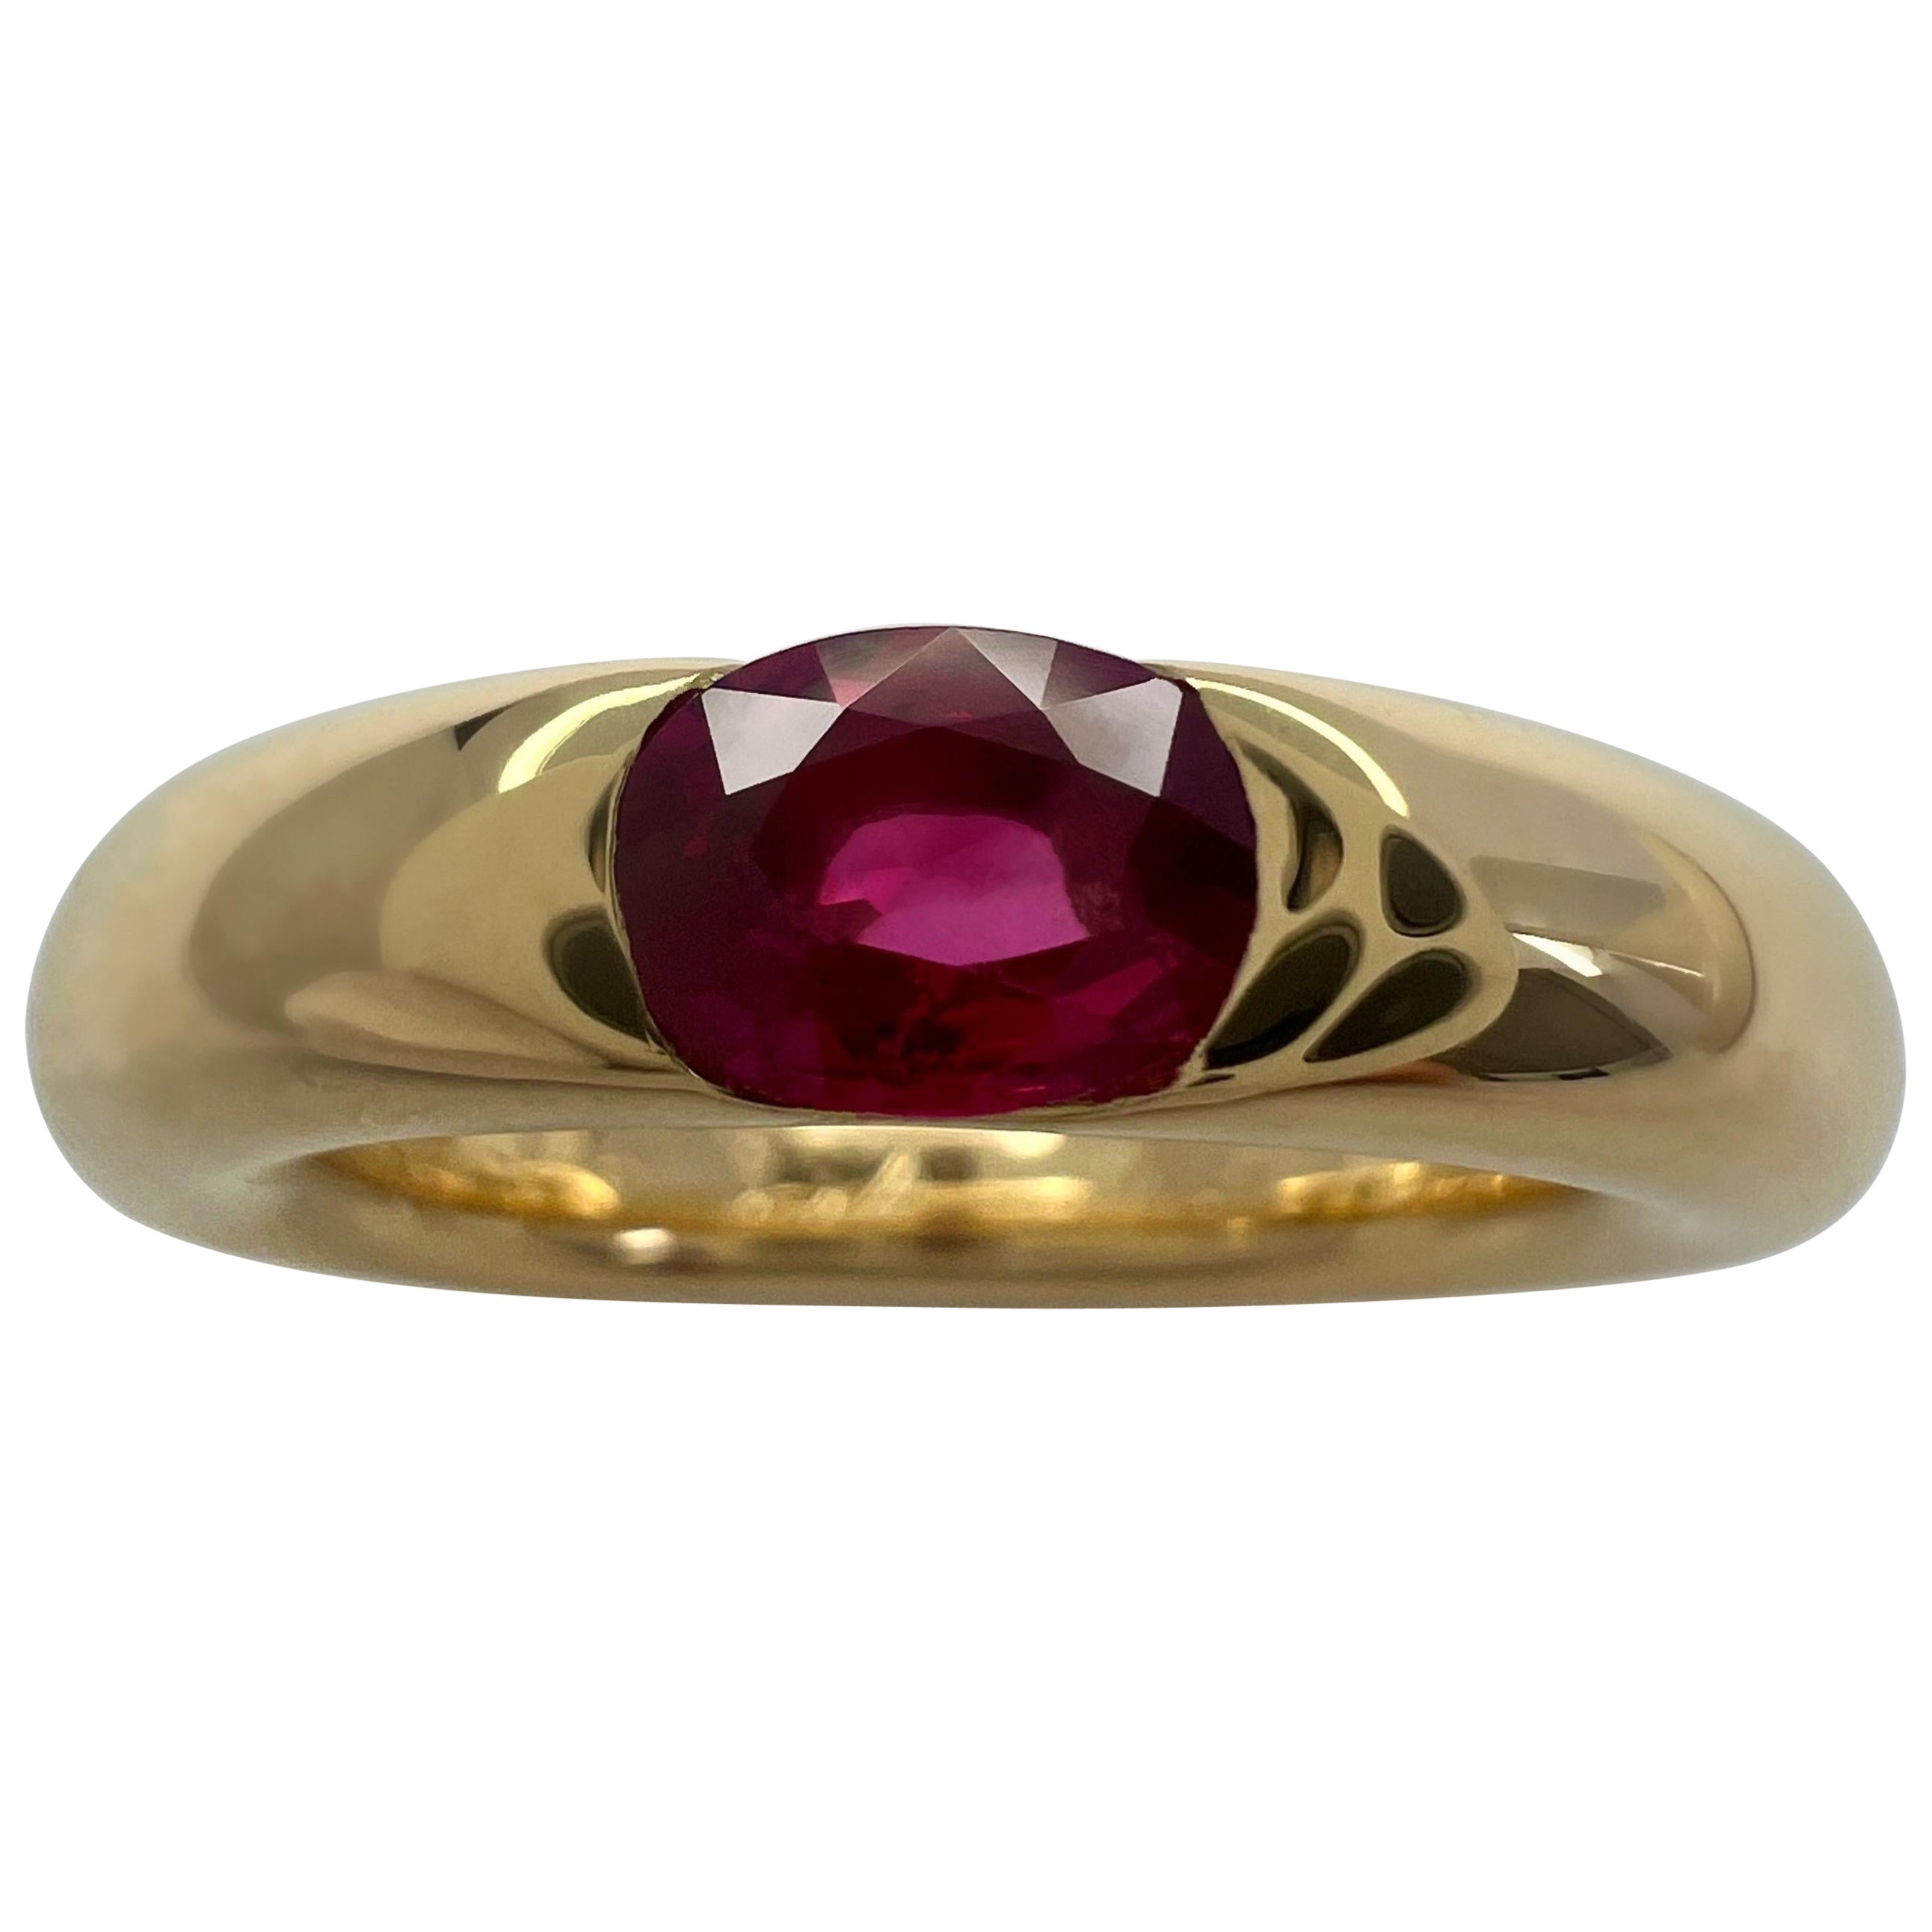 Vintage Cartier Vivid Red Ruby Ellipse 18k Gelbgold Oval Cut Solitaire Ring